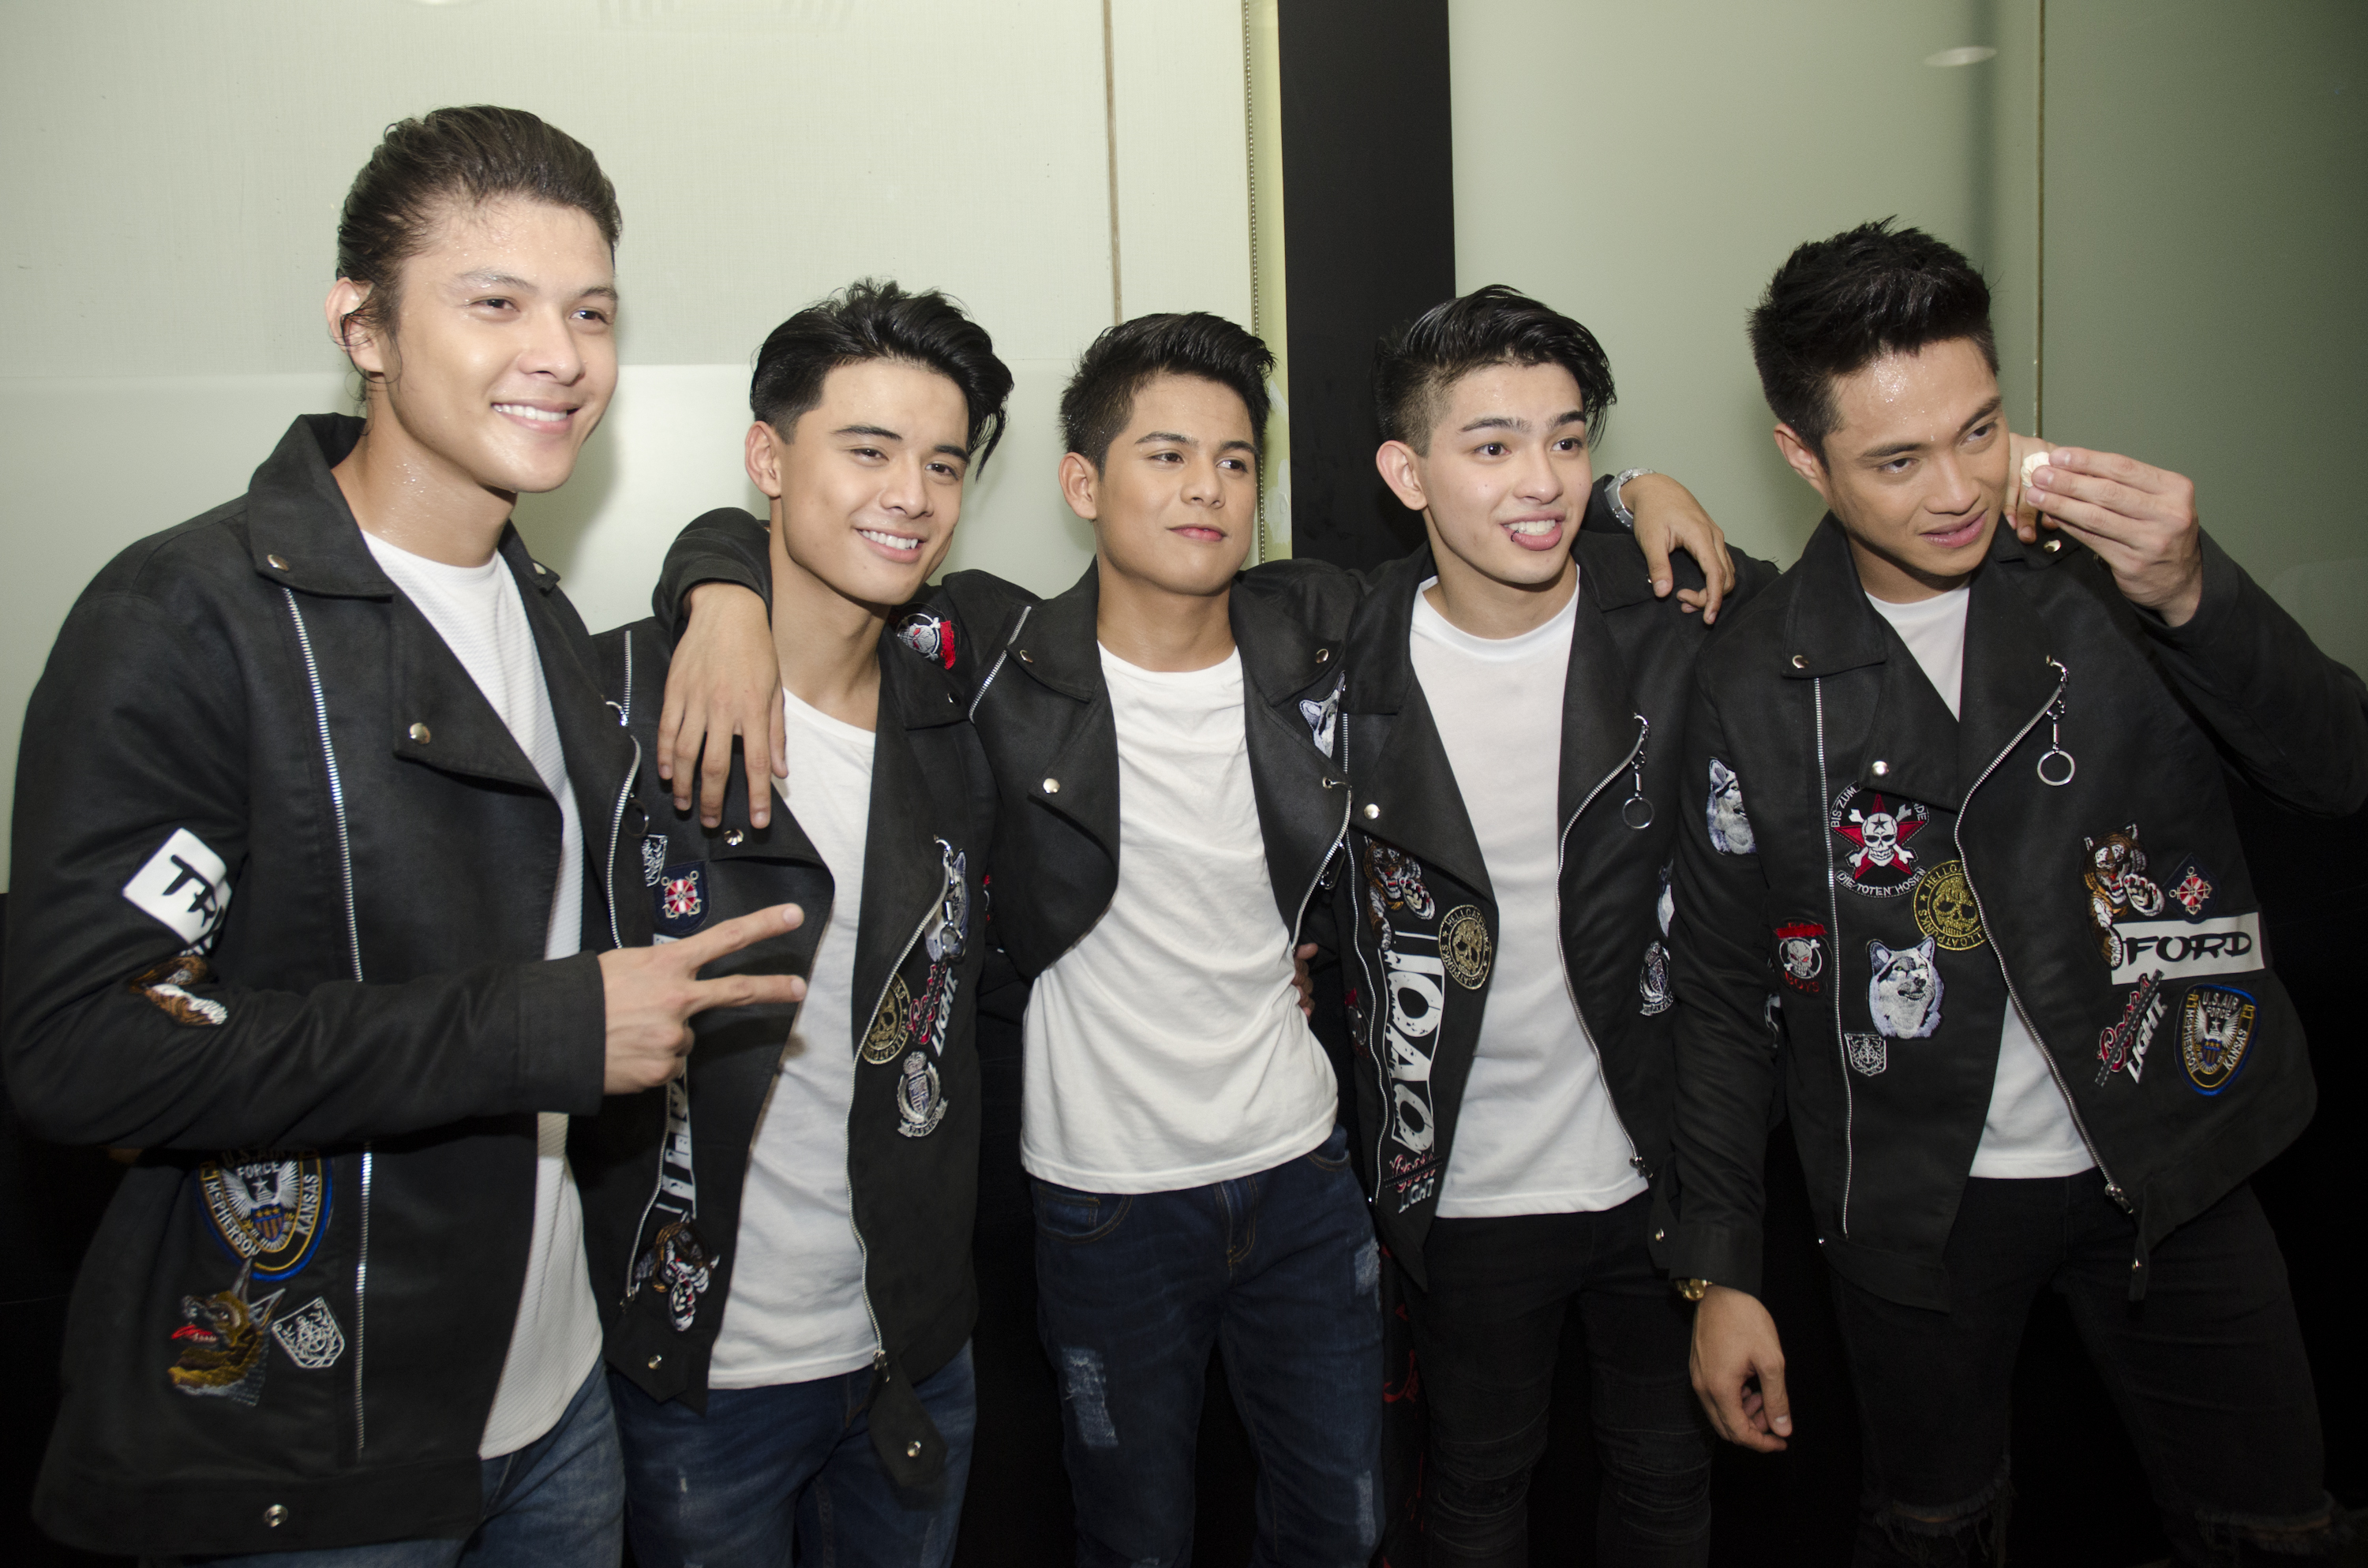 BoybandPH 6 things to know about the 'Pinoy Boyband Superstar' winners